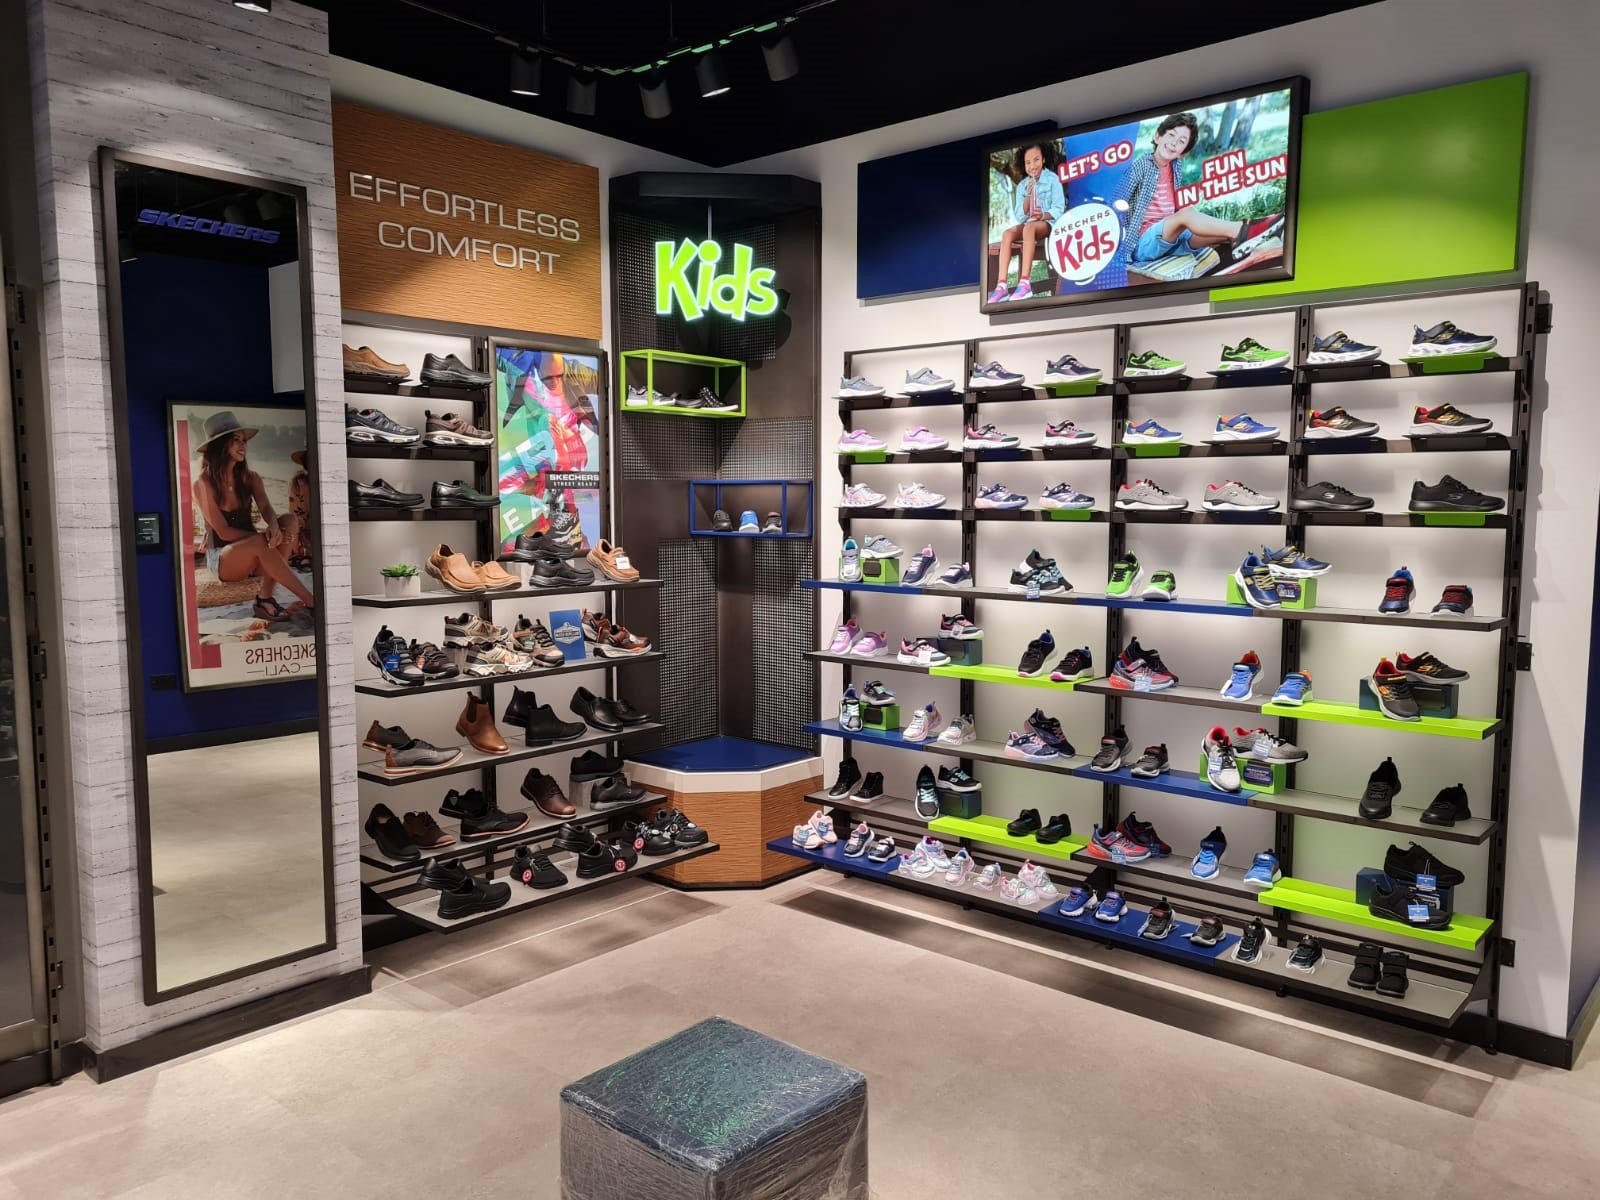 Skechers opens its first brand-new store in Poole